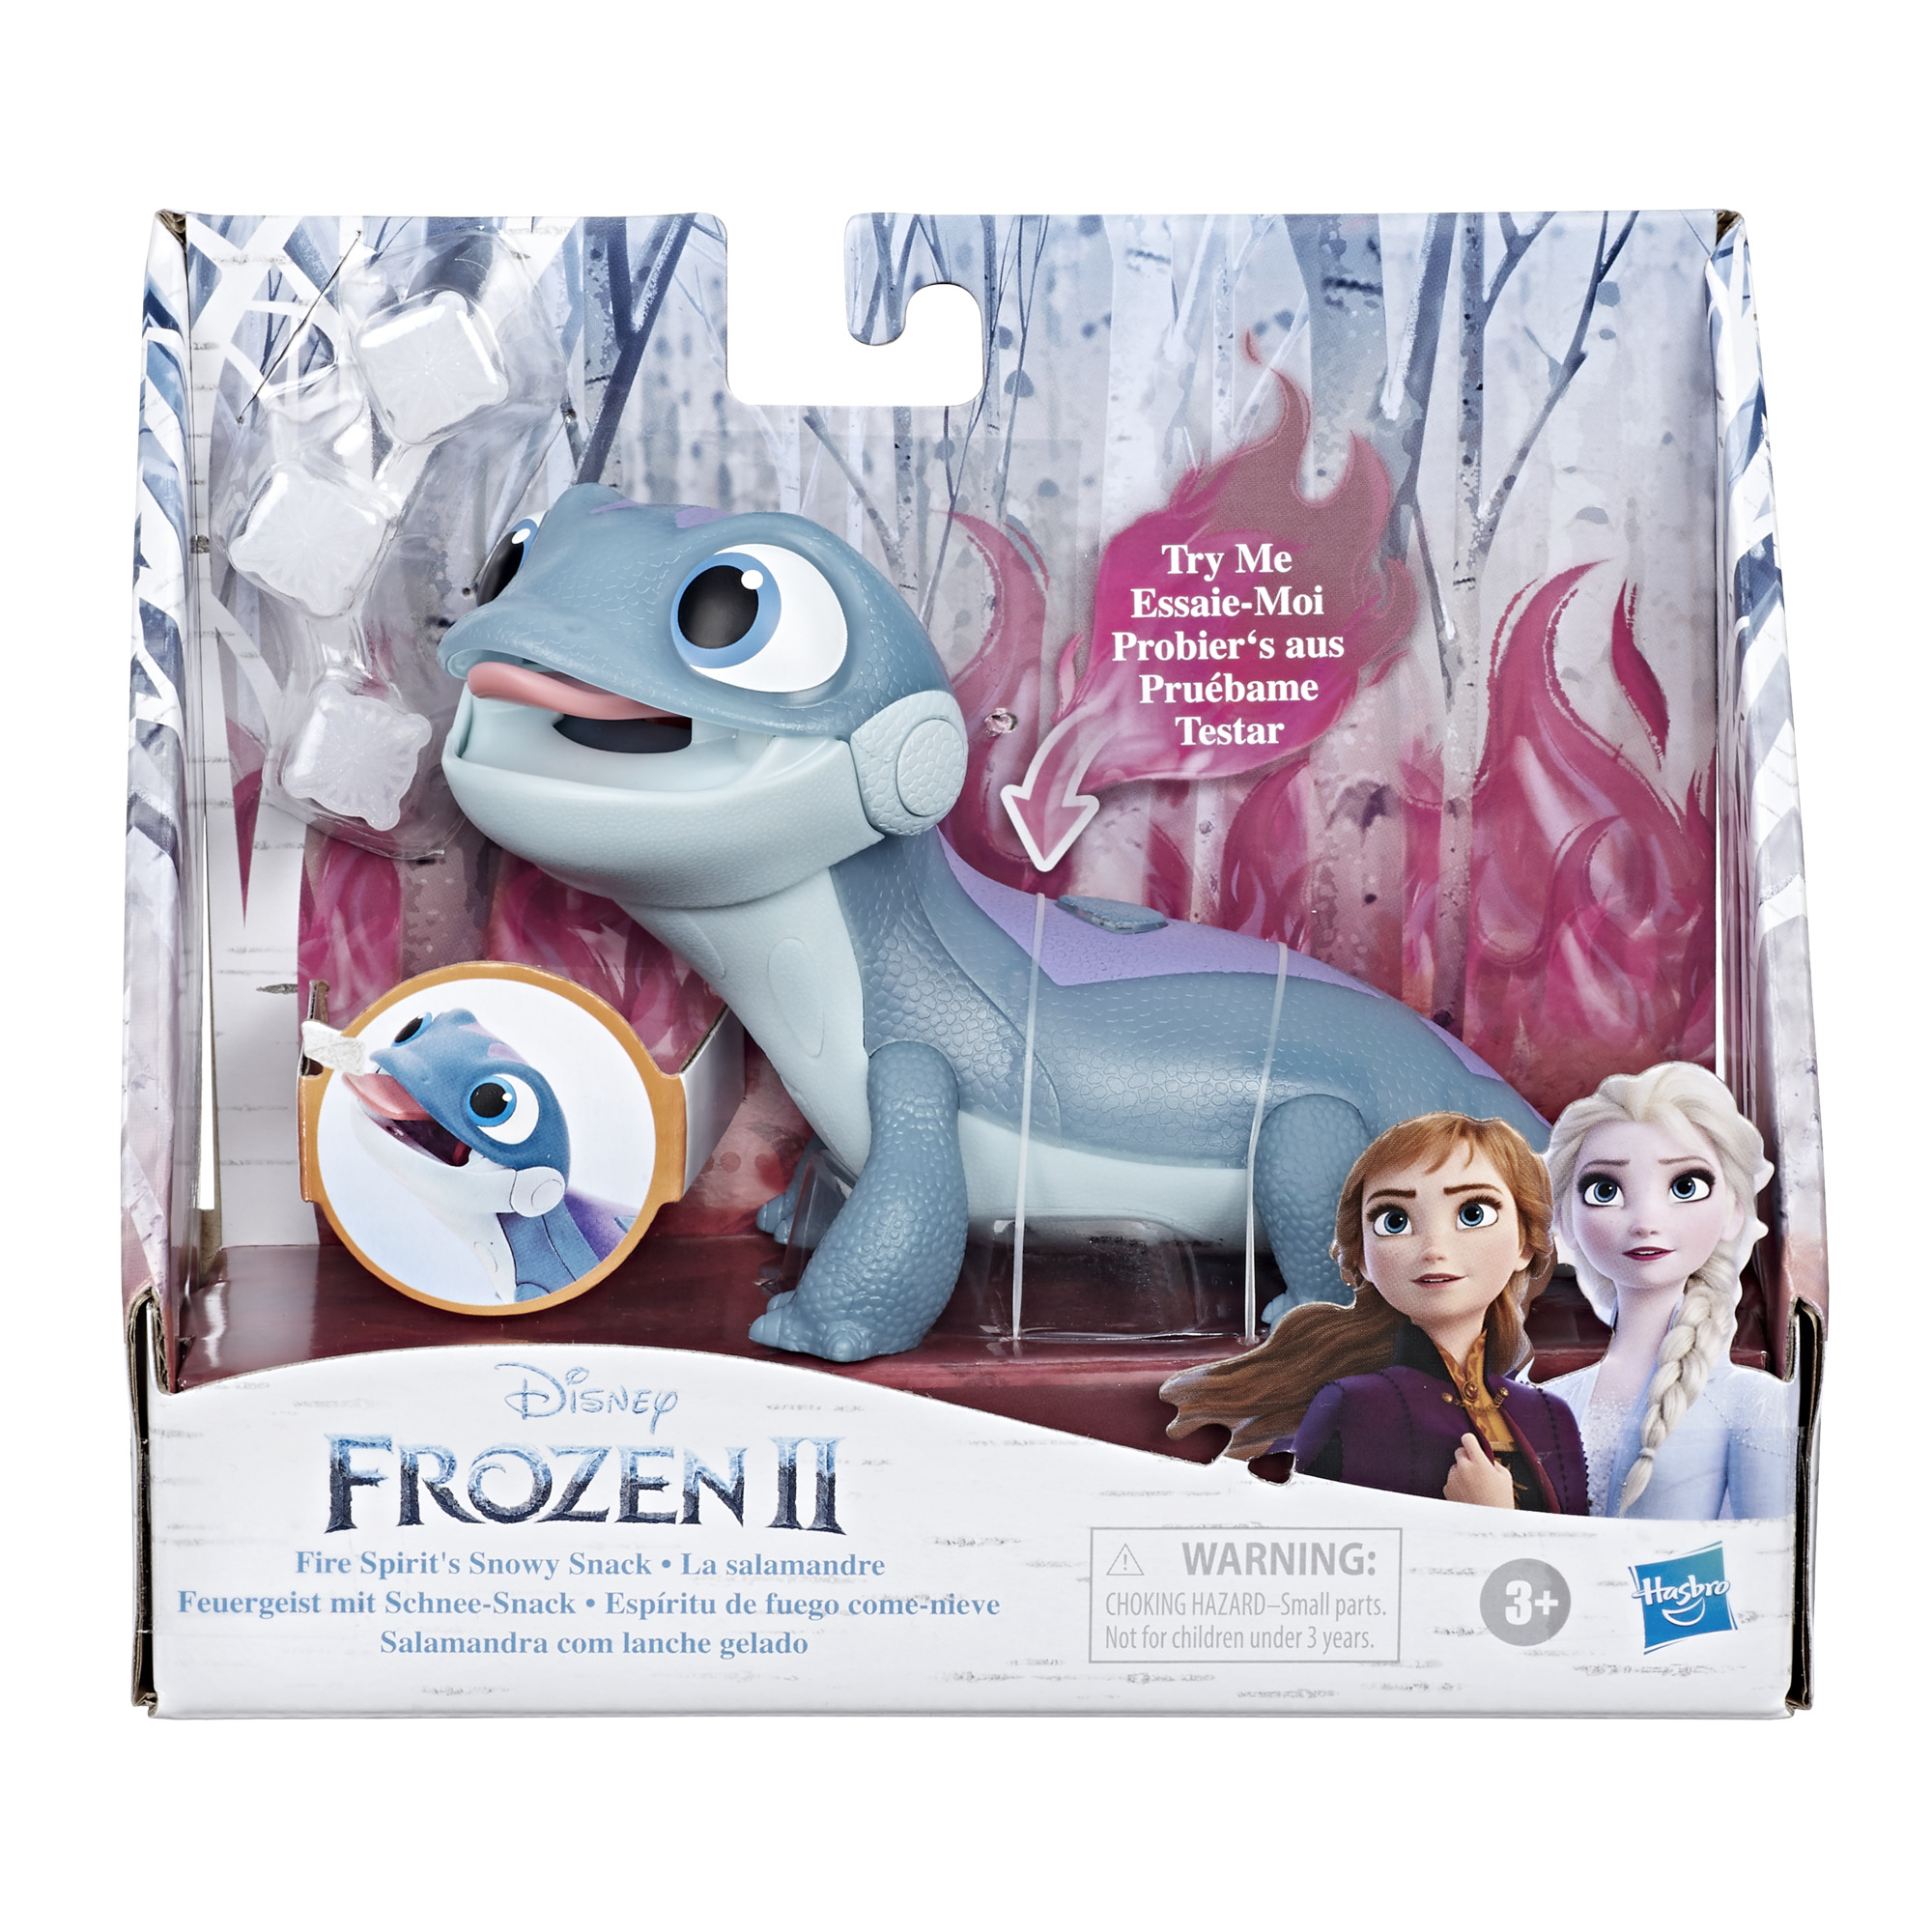 Disney Frozen 2 Fire Spirit's Snowy Snack, Salamander Toy with Lights - image 3 of 9